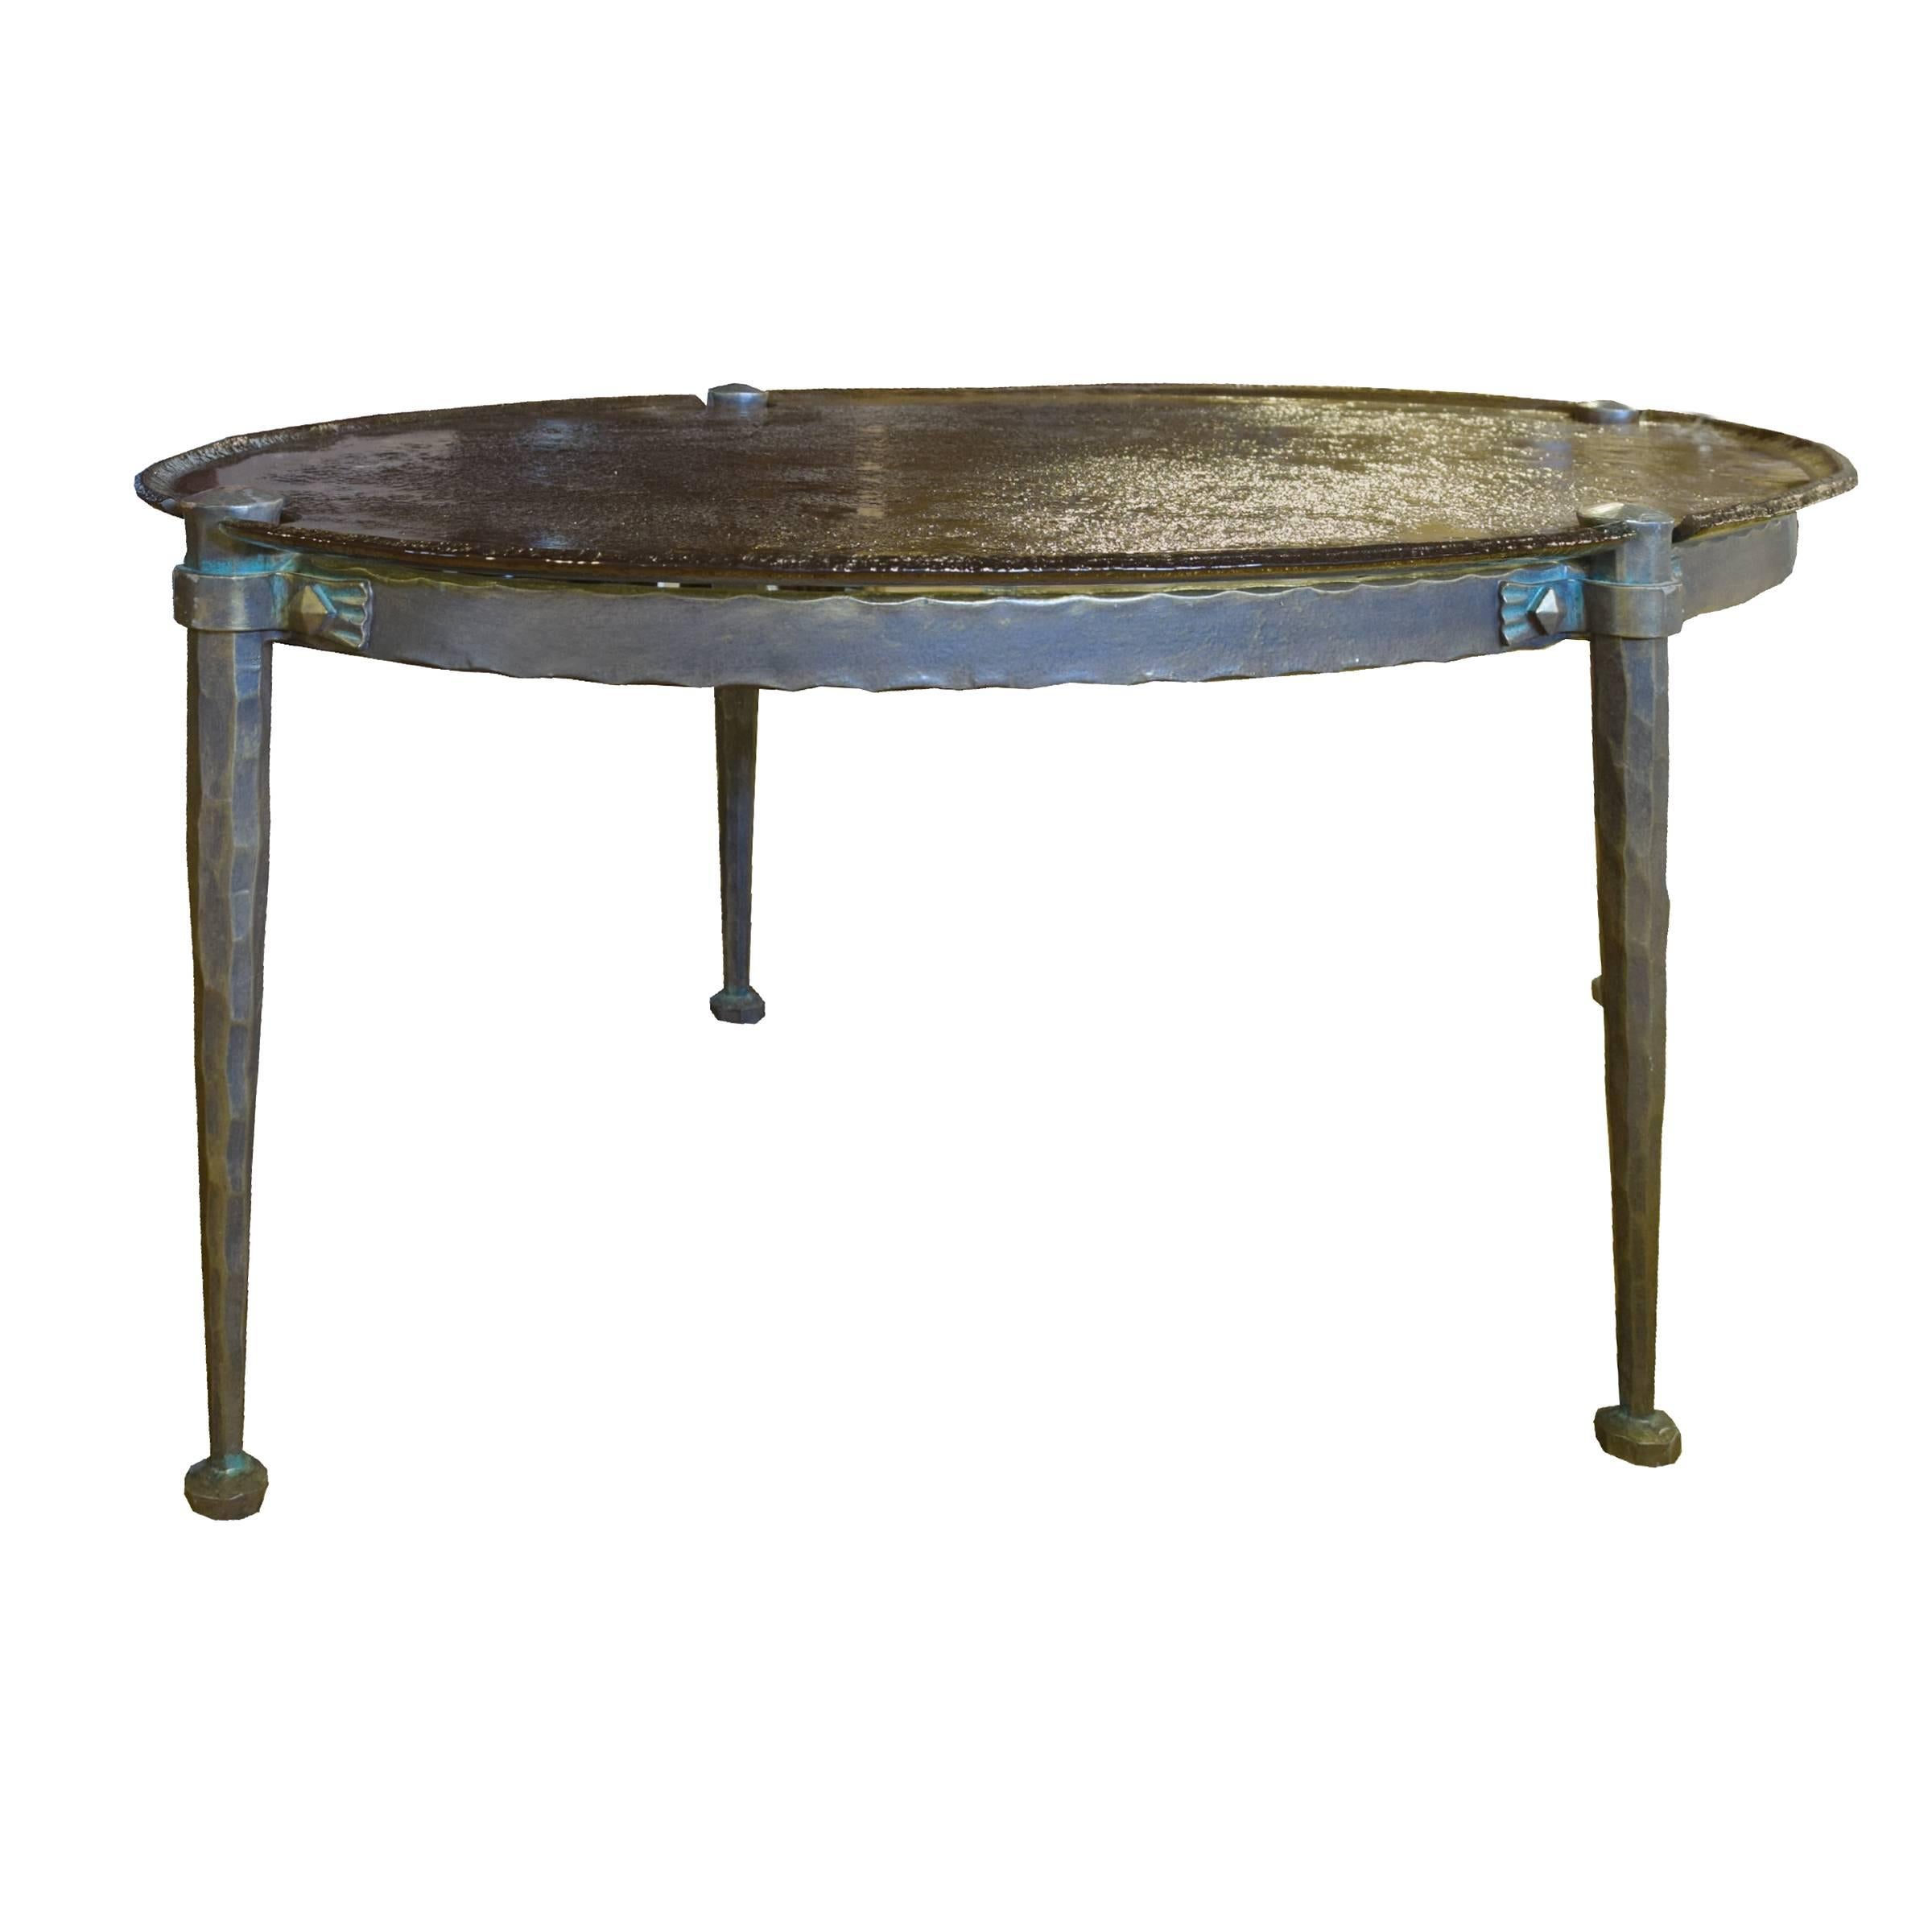 An exceptional French midcentury cast bronze four-legged low table with a great patina and a textured and smoked cast glass top.
 